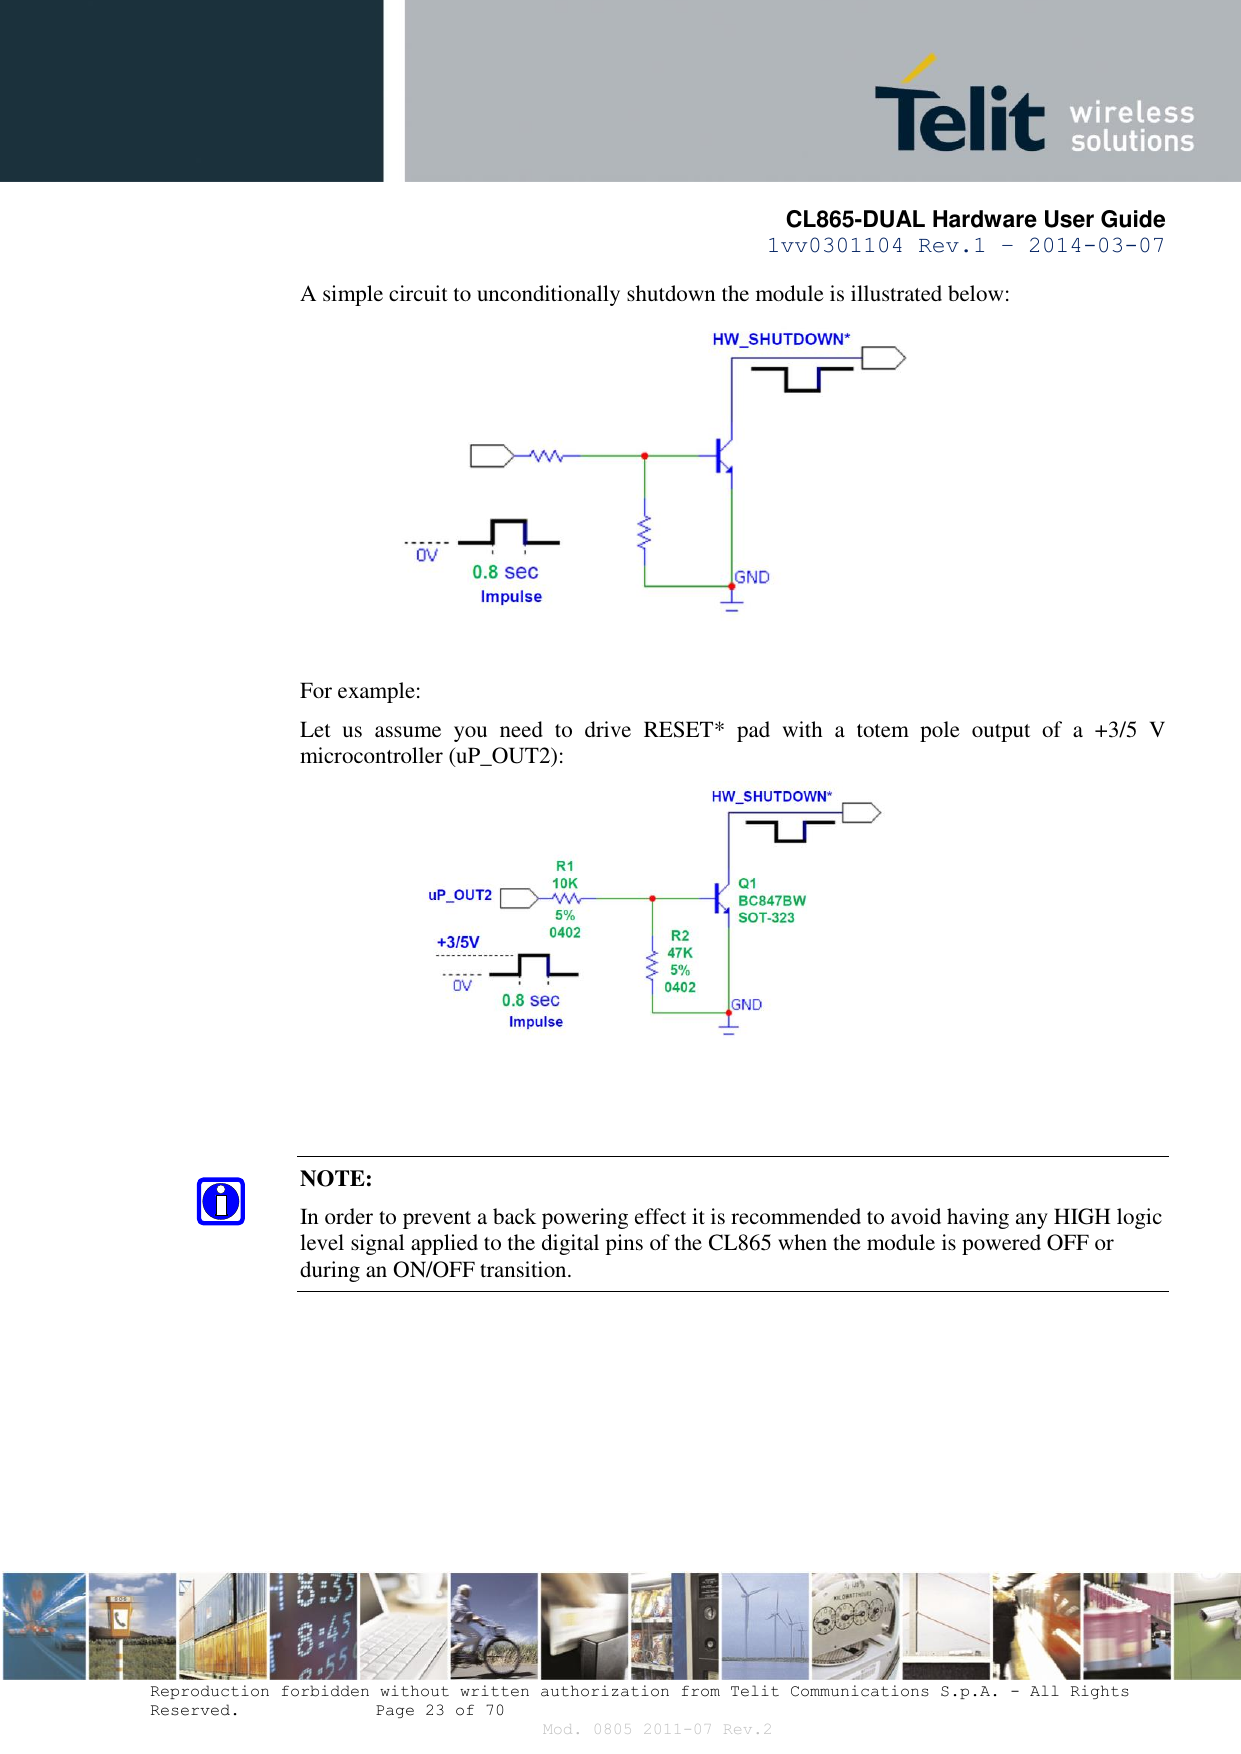       CL865-DUAL Hardware User Guide 1vv0301104 Rev.1 – 2014-03-07  Reproduction forbidden without written authorization from Telit Communications S.p.A. - All Rights Reserved.    Page 23 of 70 Mod. 0805 2011-07 Rev.2 A simple circuit to unconditionally shutdown the module is illustrated below:   For example: Let  us  assume  you  need  to  drive  RESET*  pad  with  a  totem  pole  output  of  a  +3/5  V microcontroller (uP_OUT2):     NOTE: In order to prevent a back powering effect it is recommended to avoid having any HIGH logic level signal applied to the digital pins of the CL865 when the module is powered OFF or during an ON/OFF transition.   